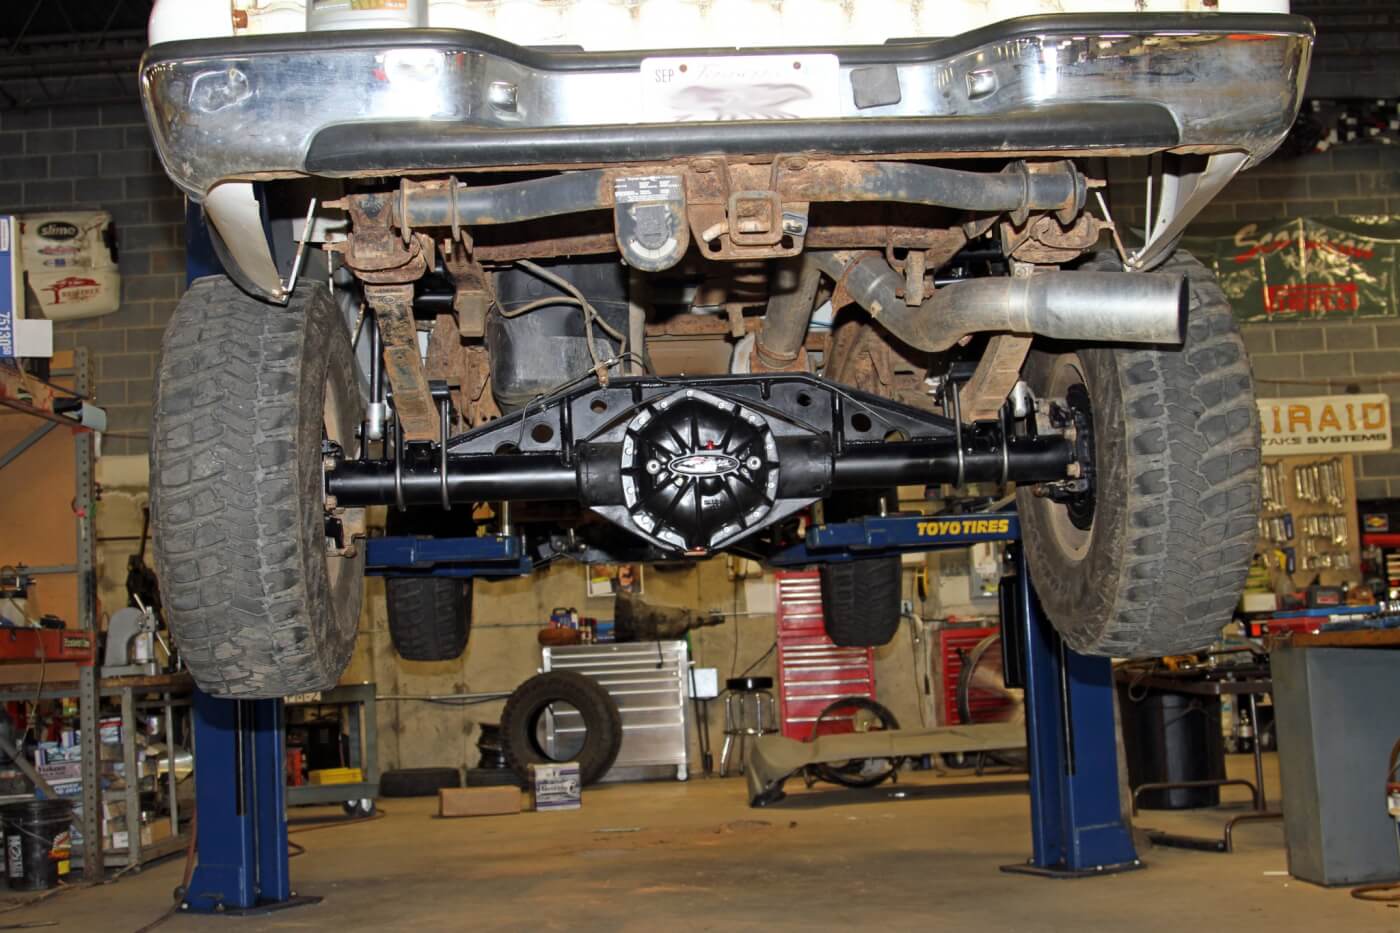 36. Not only does the axle look much better it’s also much stronger with larger tubes and a serious axle truss. Also notice that there is nothing hanging below the axle to get caught on rocks or other obstacles while off road.